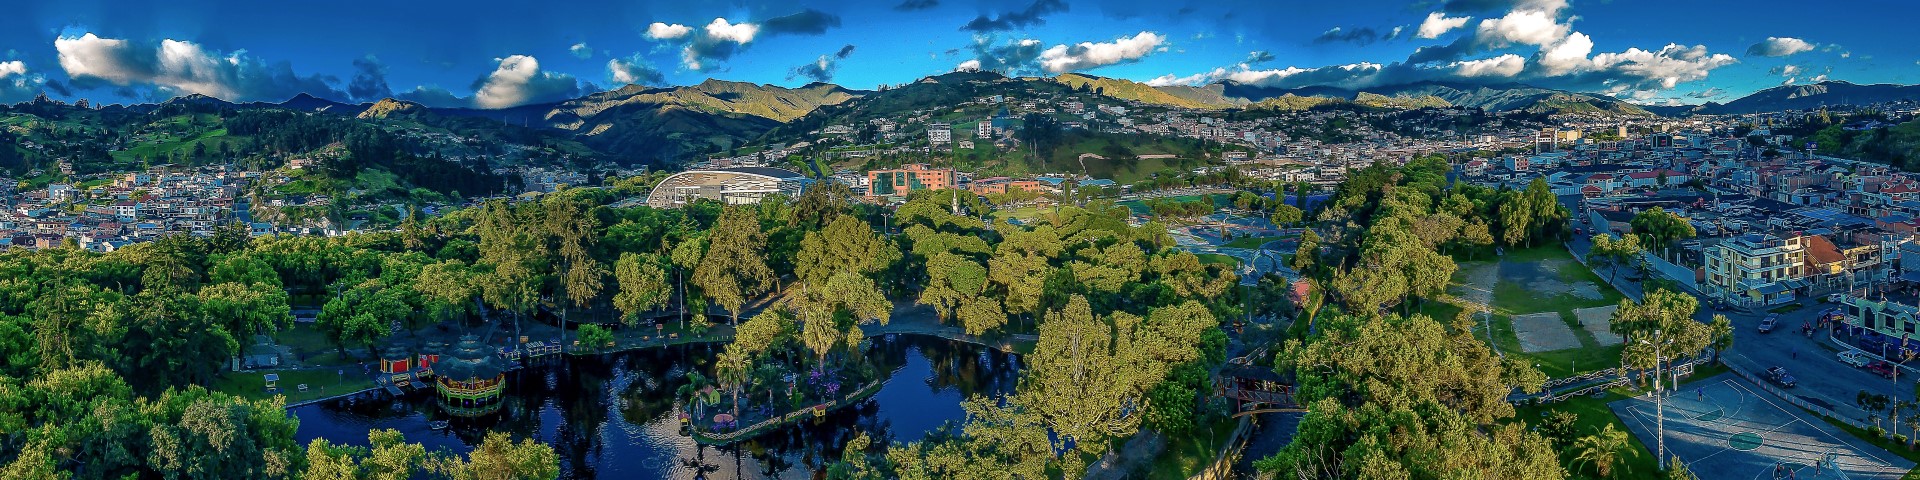 Panoramic image of a park surrounded by a green city and a hilly landscape.